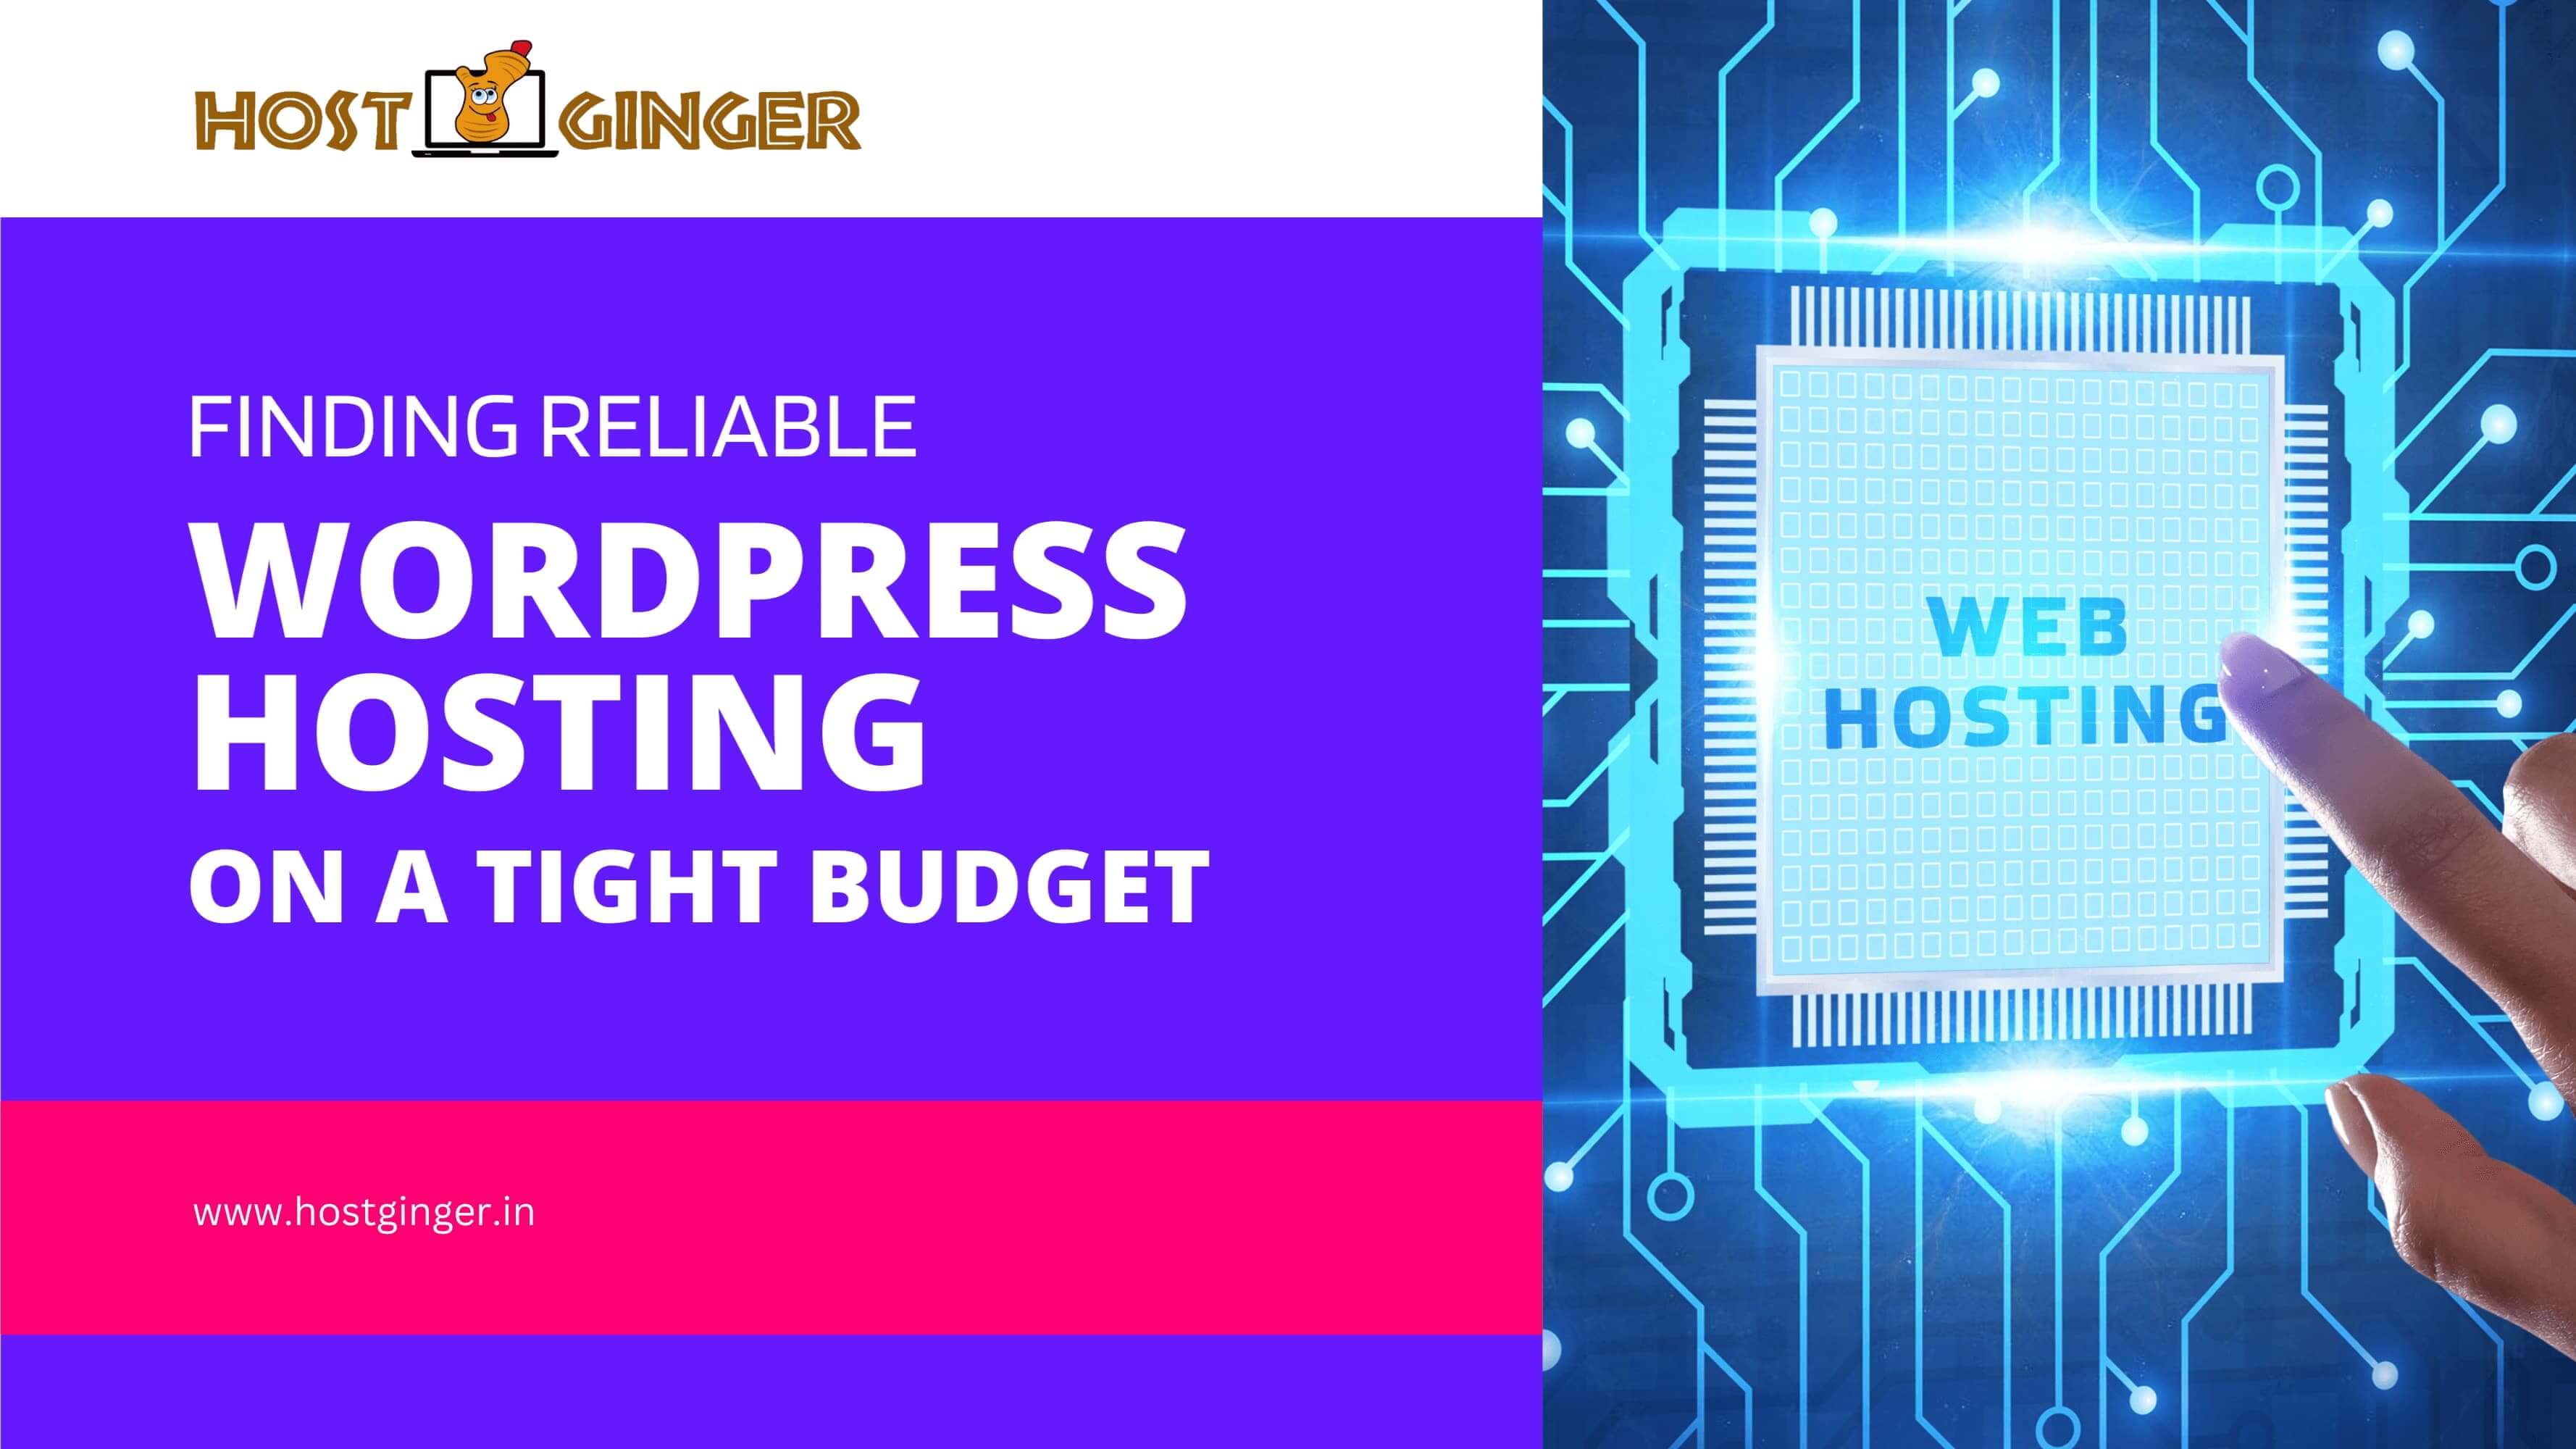 Finding Reliable WordPress Hosting on a Tight Budget